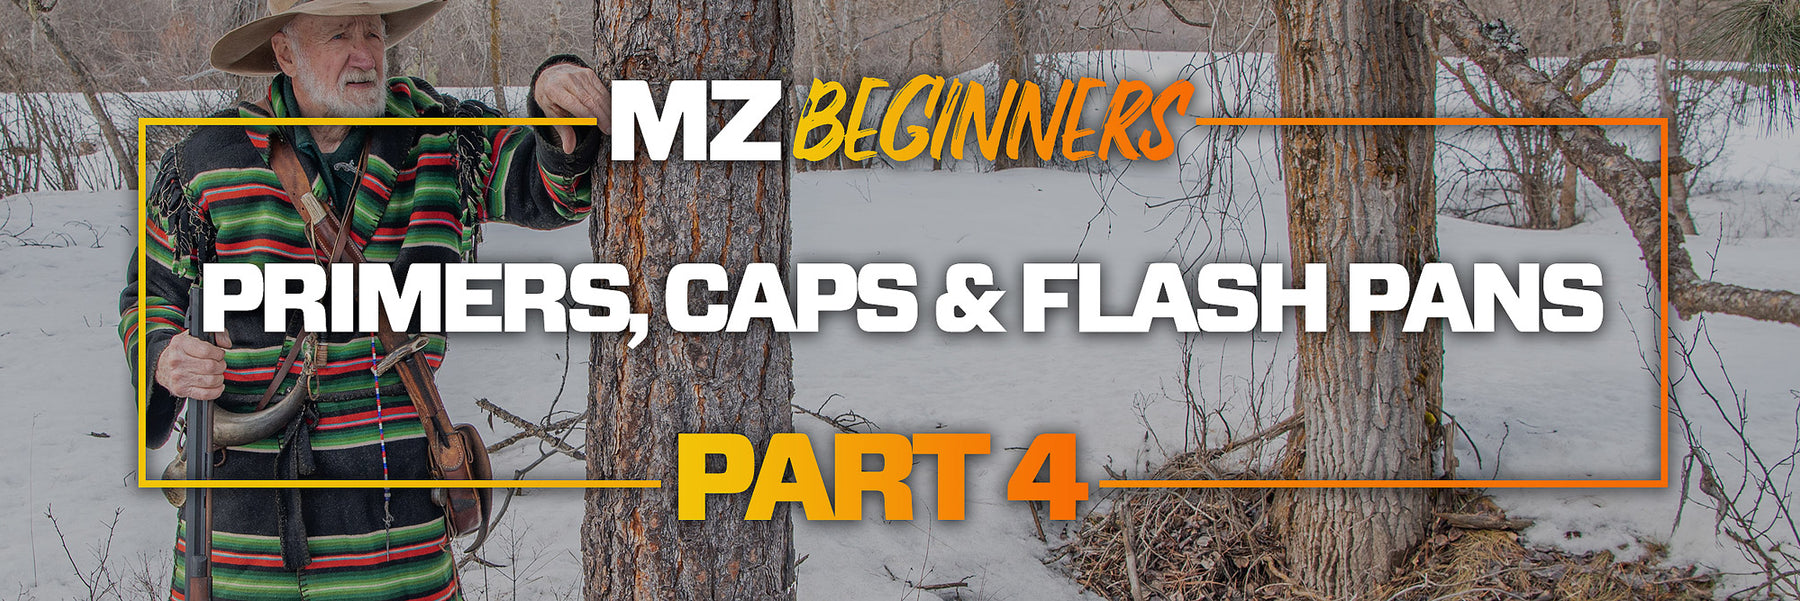 Primers, Percussion Caps & Flashpans - What You Need To Know - The Beginners Guide To Muzzleloading - Part 4